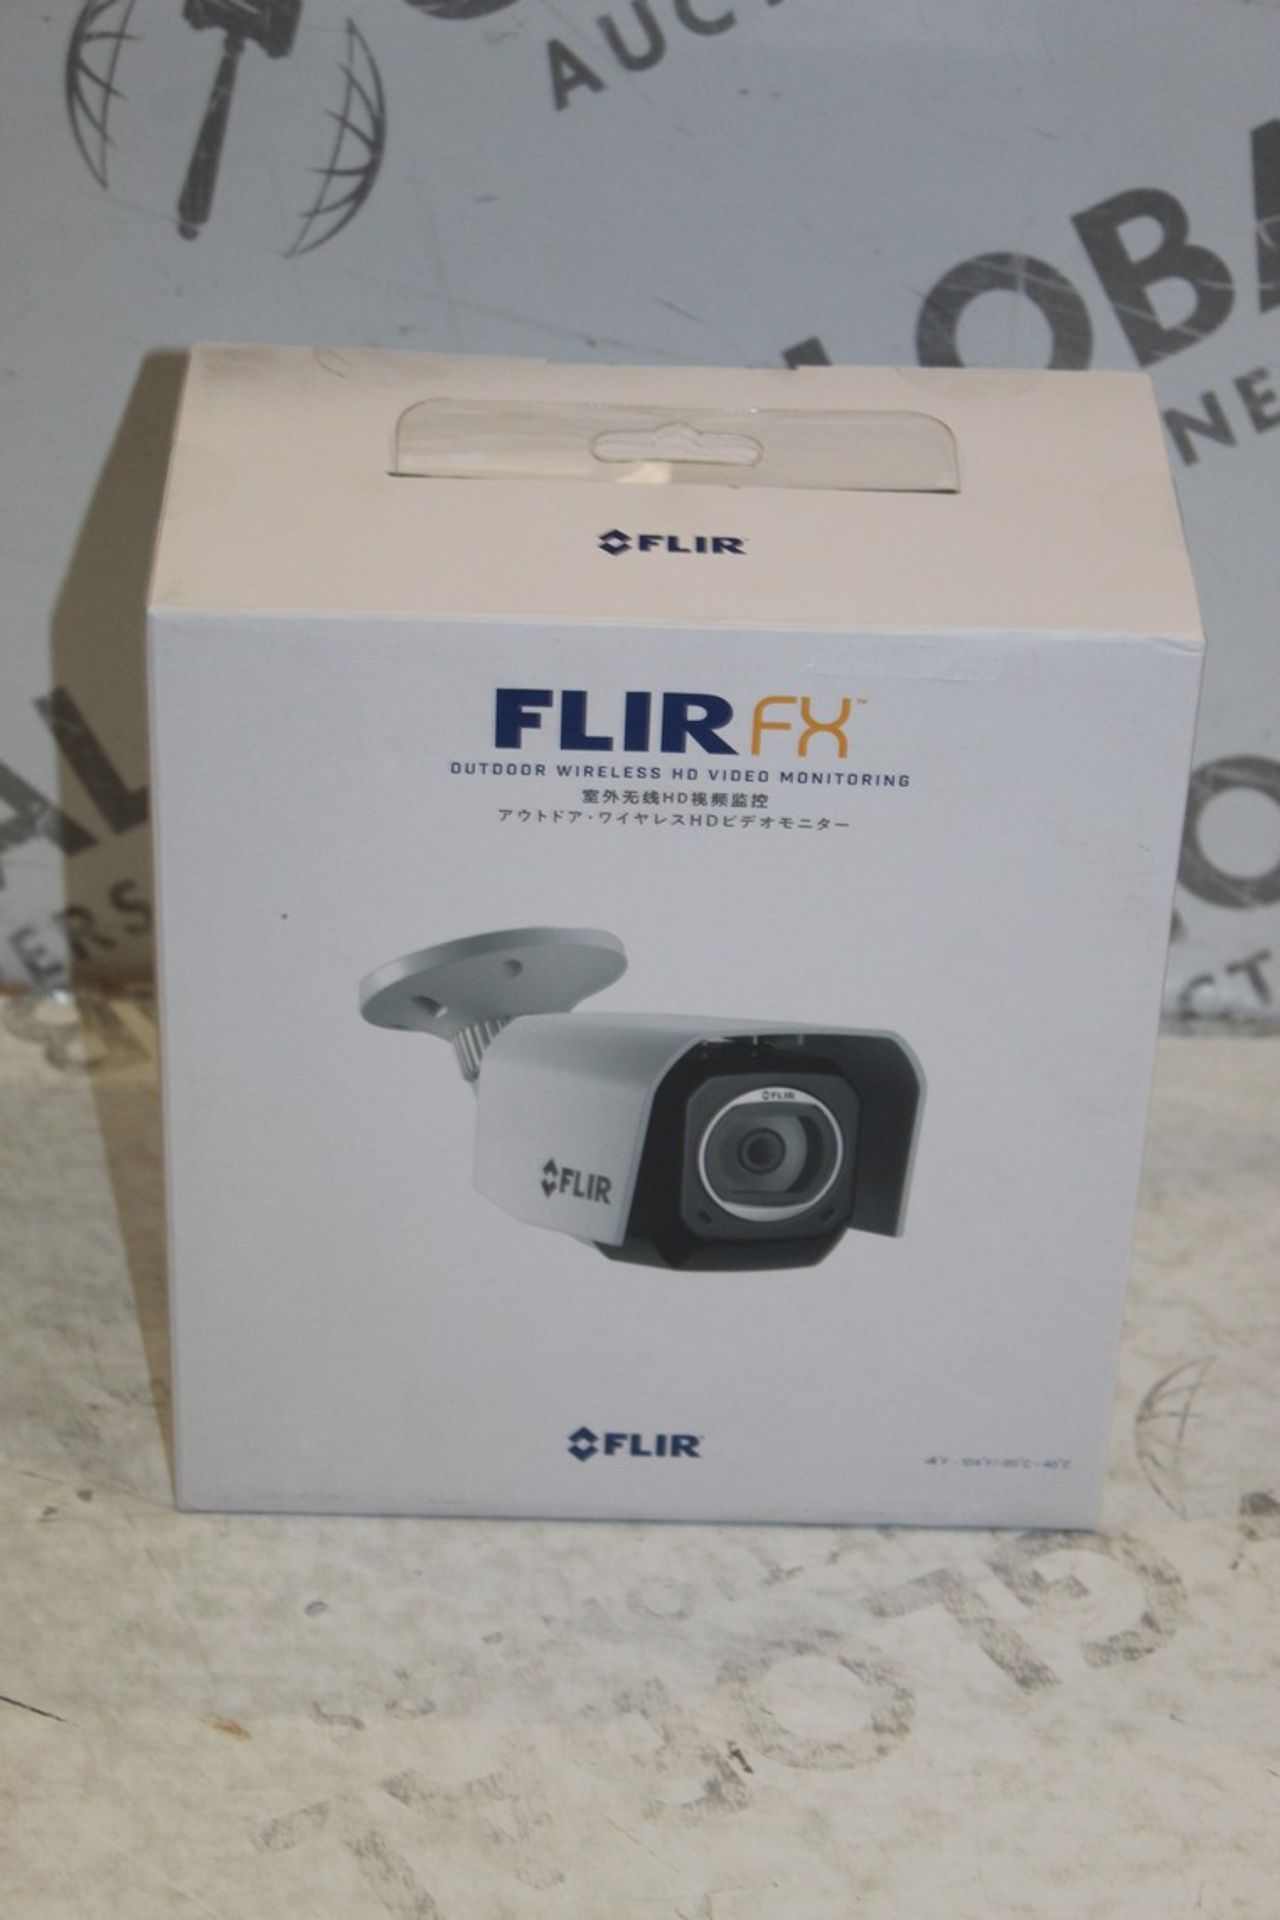 Boxed Flir FX Outdoor Wireless HD Monitoring Camera RRP £300 (Pictures Are For Illustration Purposes